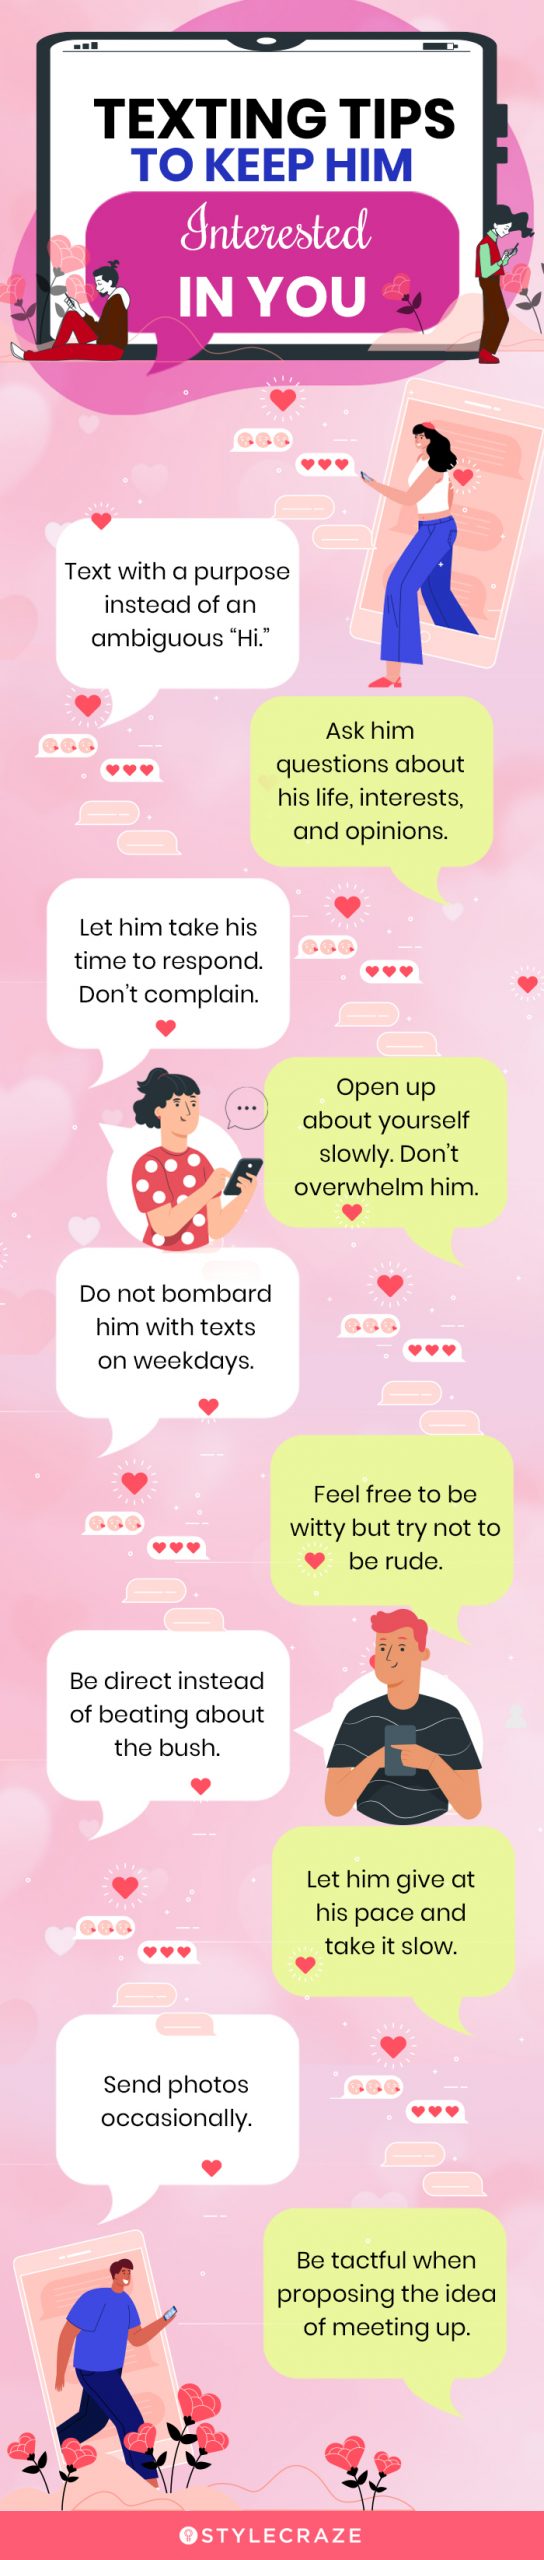 texting tips to keep him interested in you (infographic)